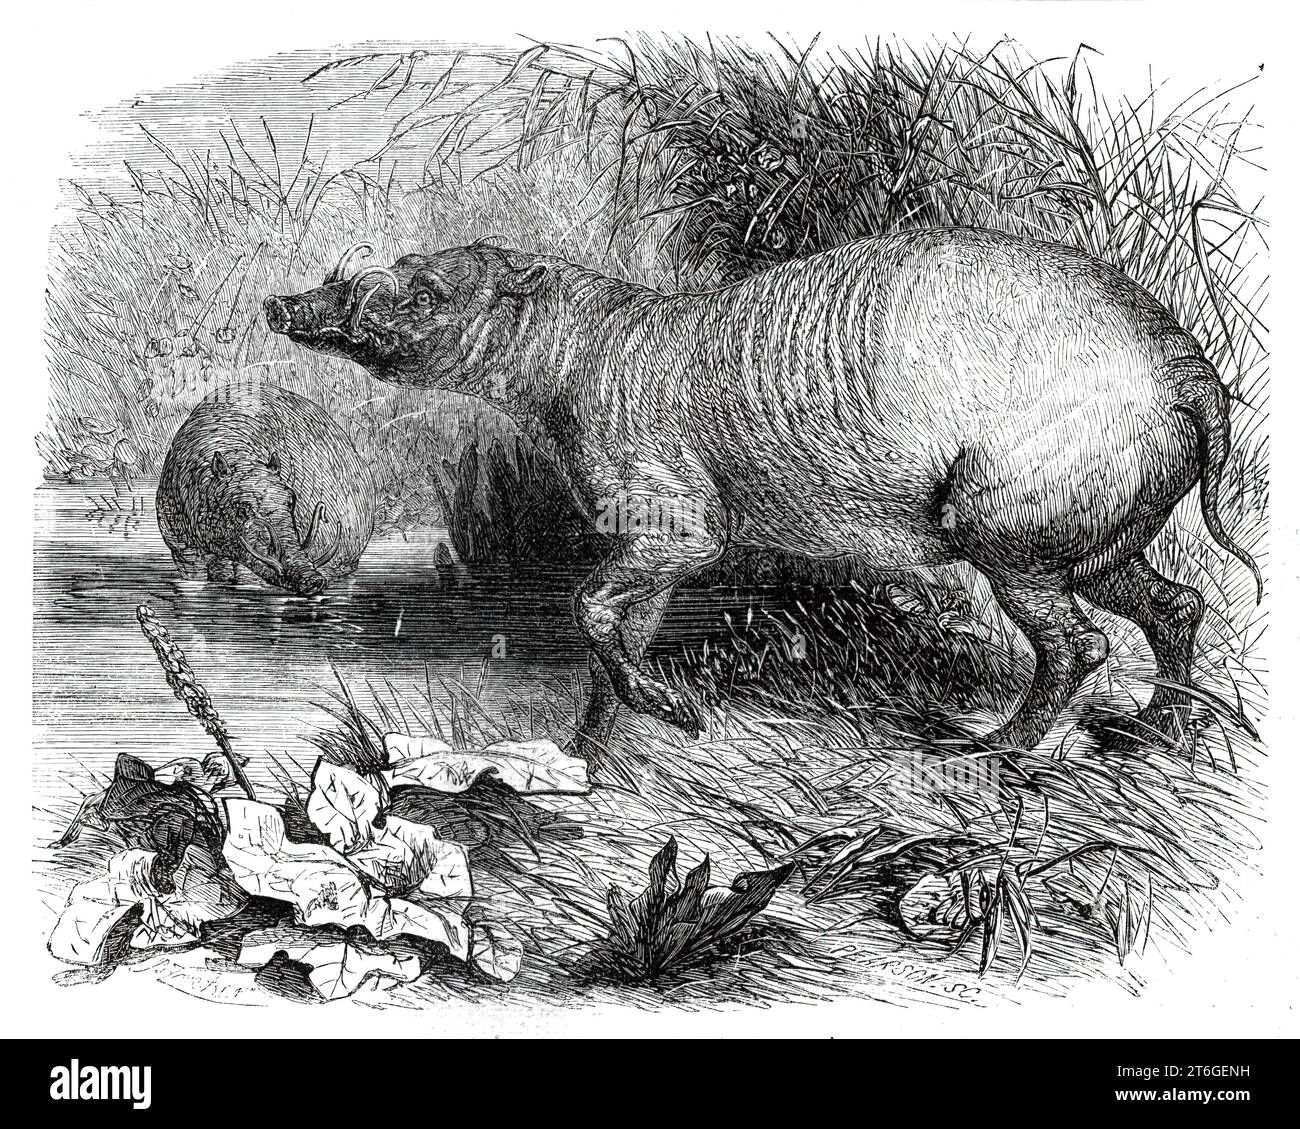 The Babirussa, recently added to the Zoological Society's Gardens, Regent's Park, [London], 1860. 'The babirussa of the Island of Celebes (Sus babirussa, or Babirussa alfurus of Systematists) is one of the most peculiar and certainly one of the most rare of this group of quadrupeds...The present example [of the Suidae or swine family]...is a fine young male, and exhibits only partially the curious structure of the tufts for which the adult male is so celebrated, and which must render him so formidable an opponent in the forest. These tusks grow upwards instead of downwards from the upper jaw, Stock Photo